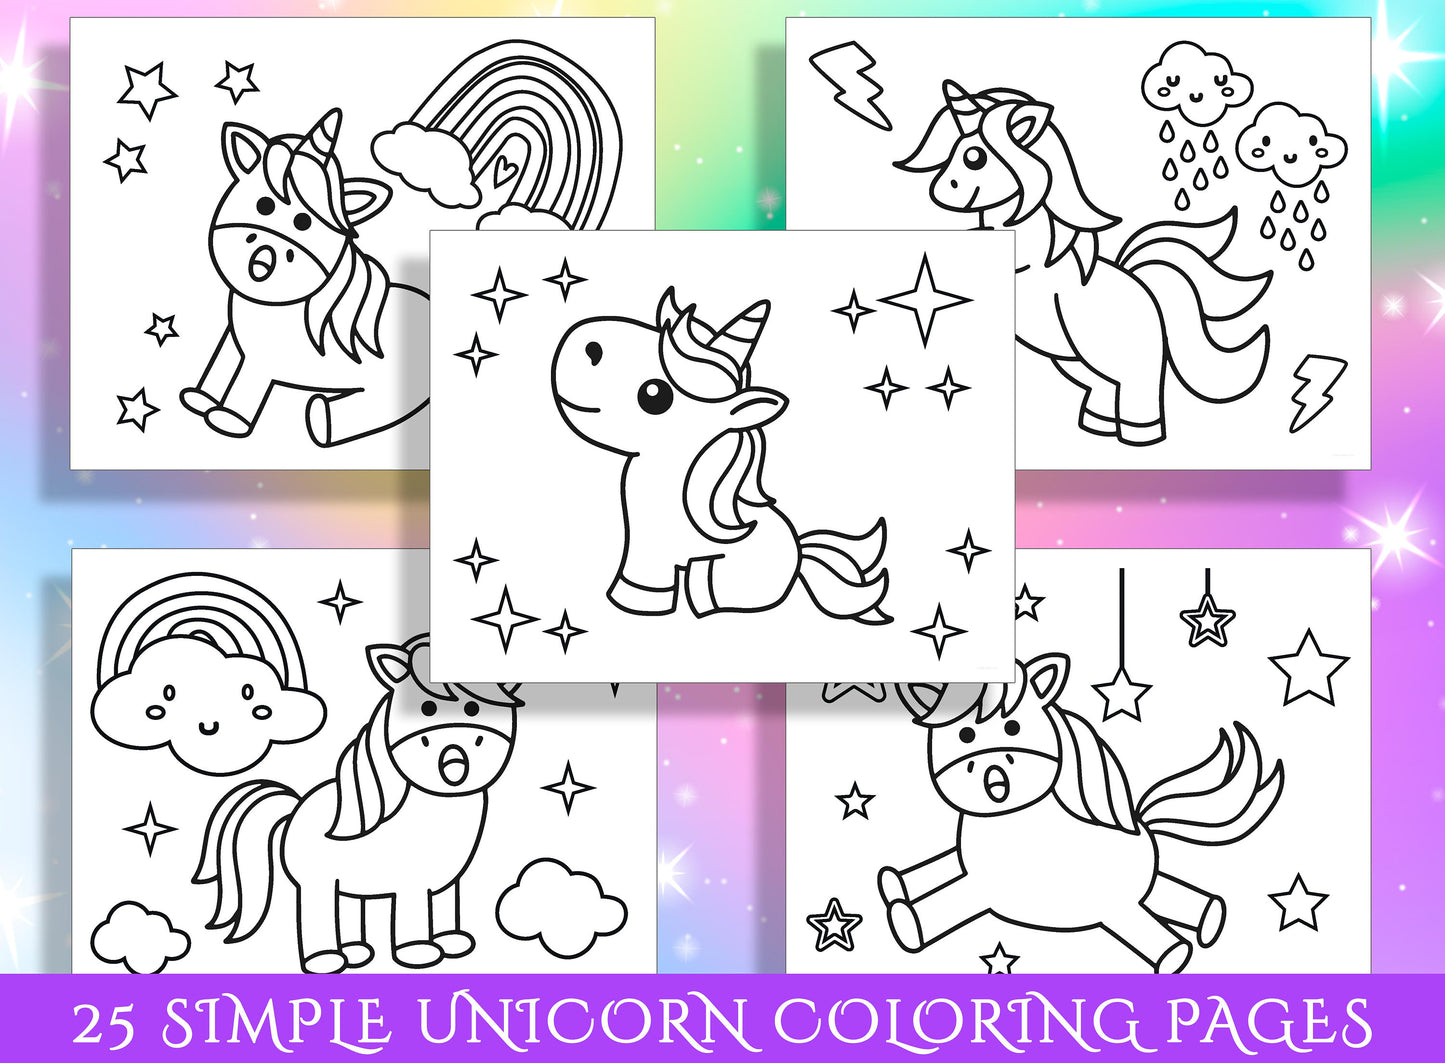 Simple Unicorn Coloring Pages: 25 Simple Designs for Preschool and Kindergarten, PDF File, Instant Download